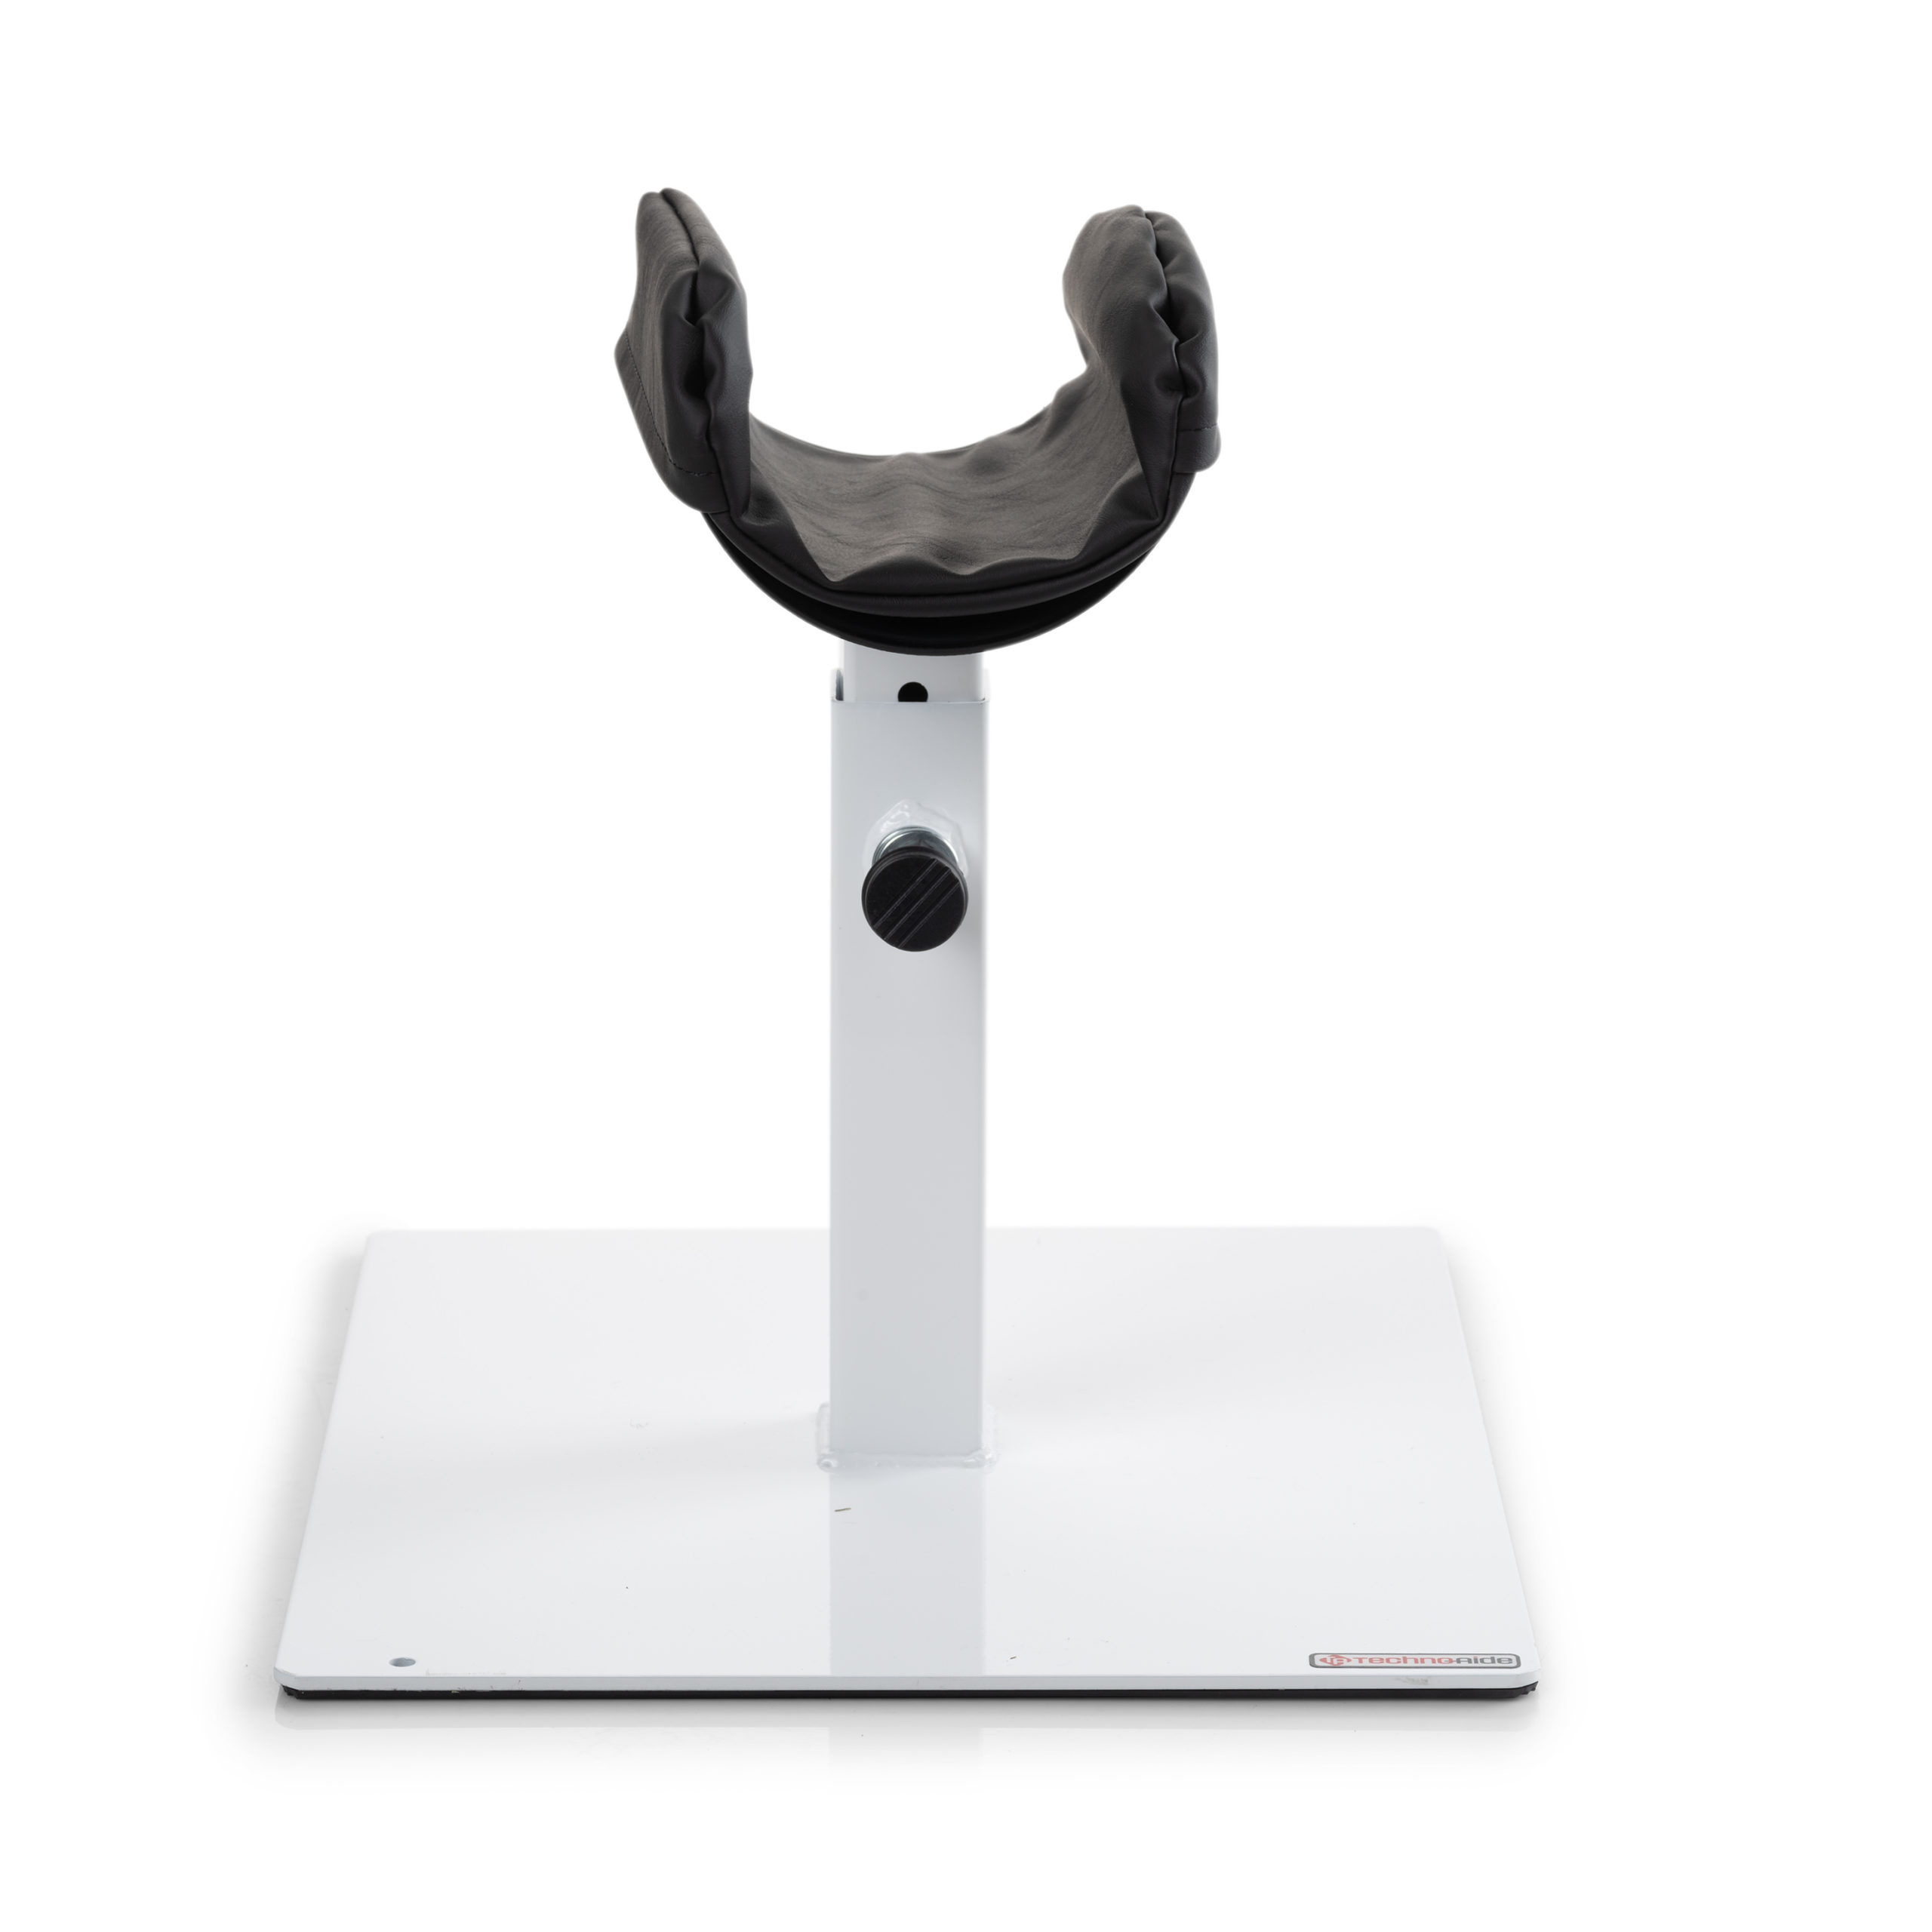  DogUp Stand - Adjustable Dog Grooming Support Stand